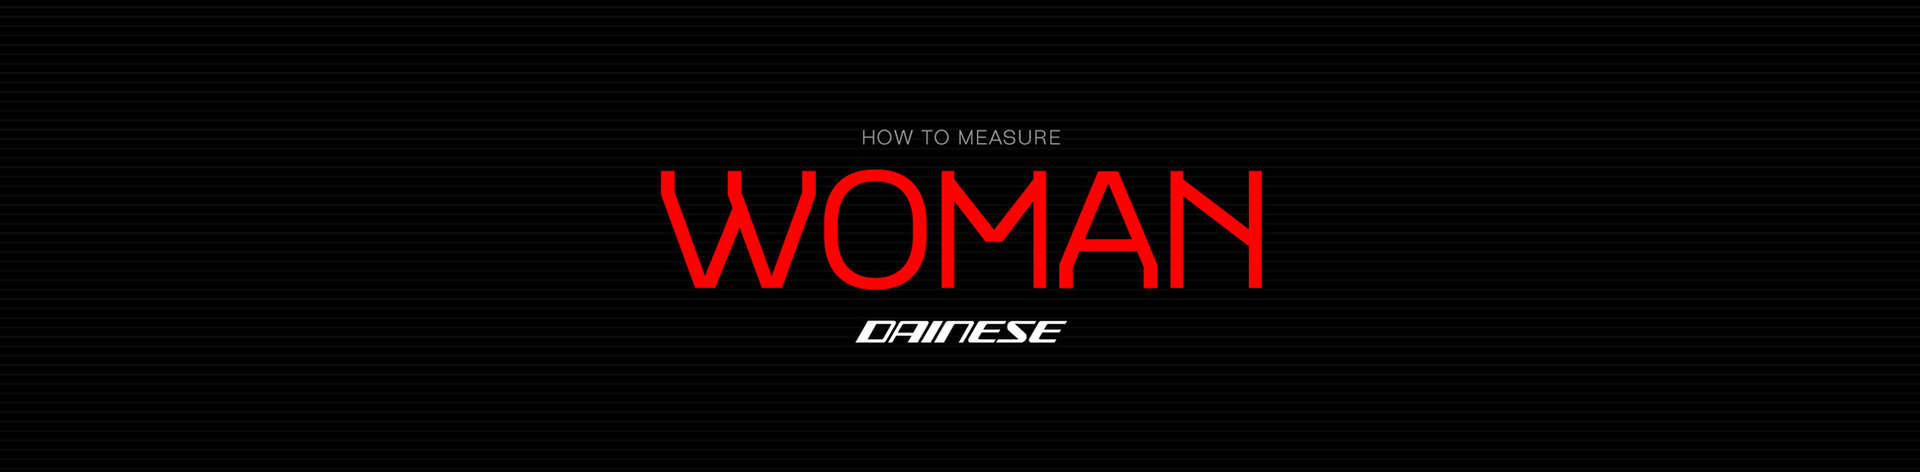 How to measure WOMAN